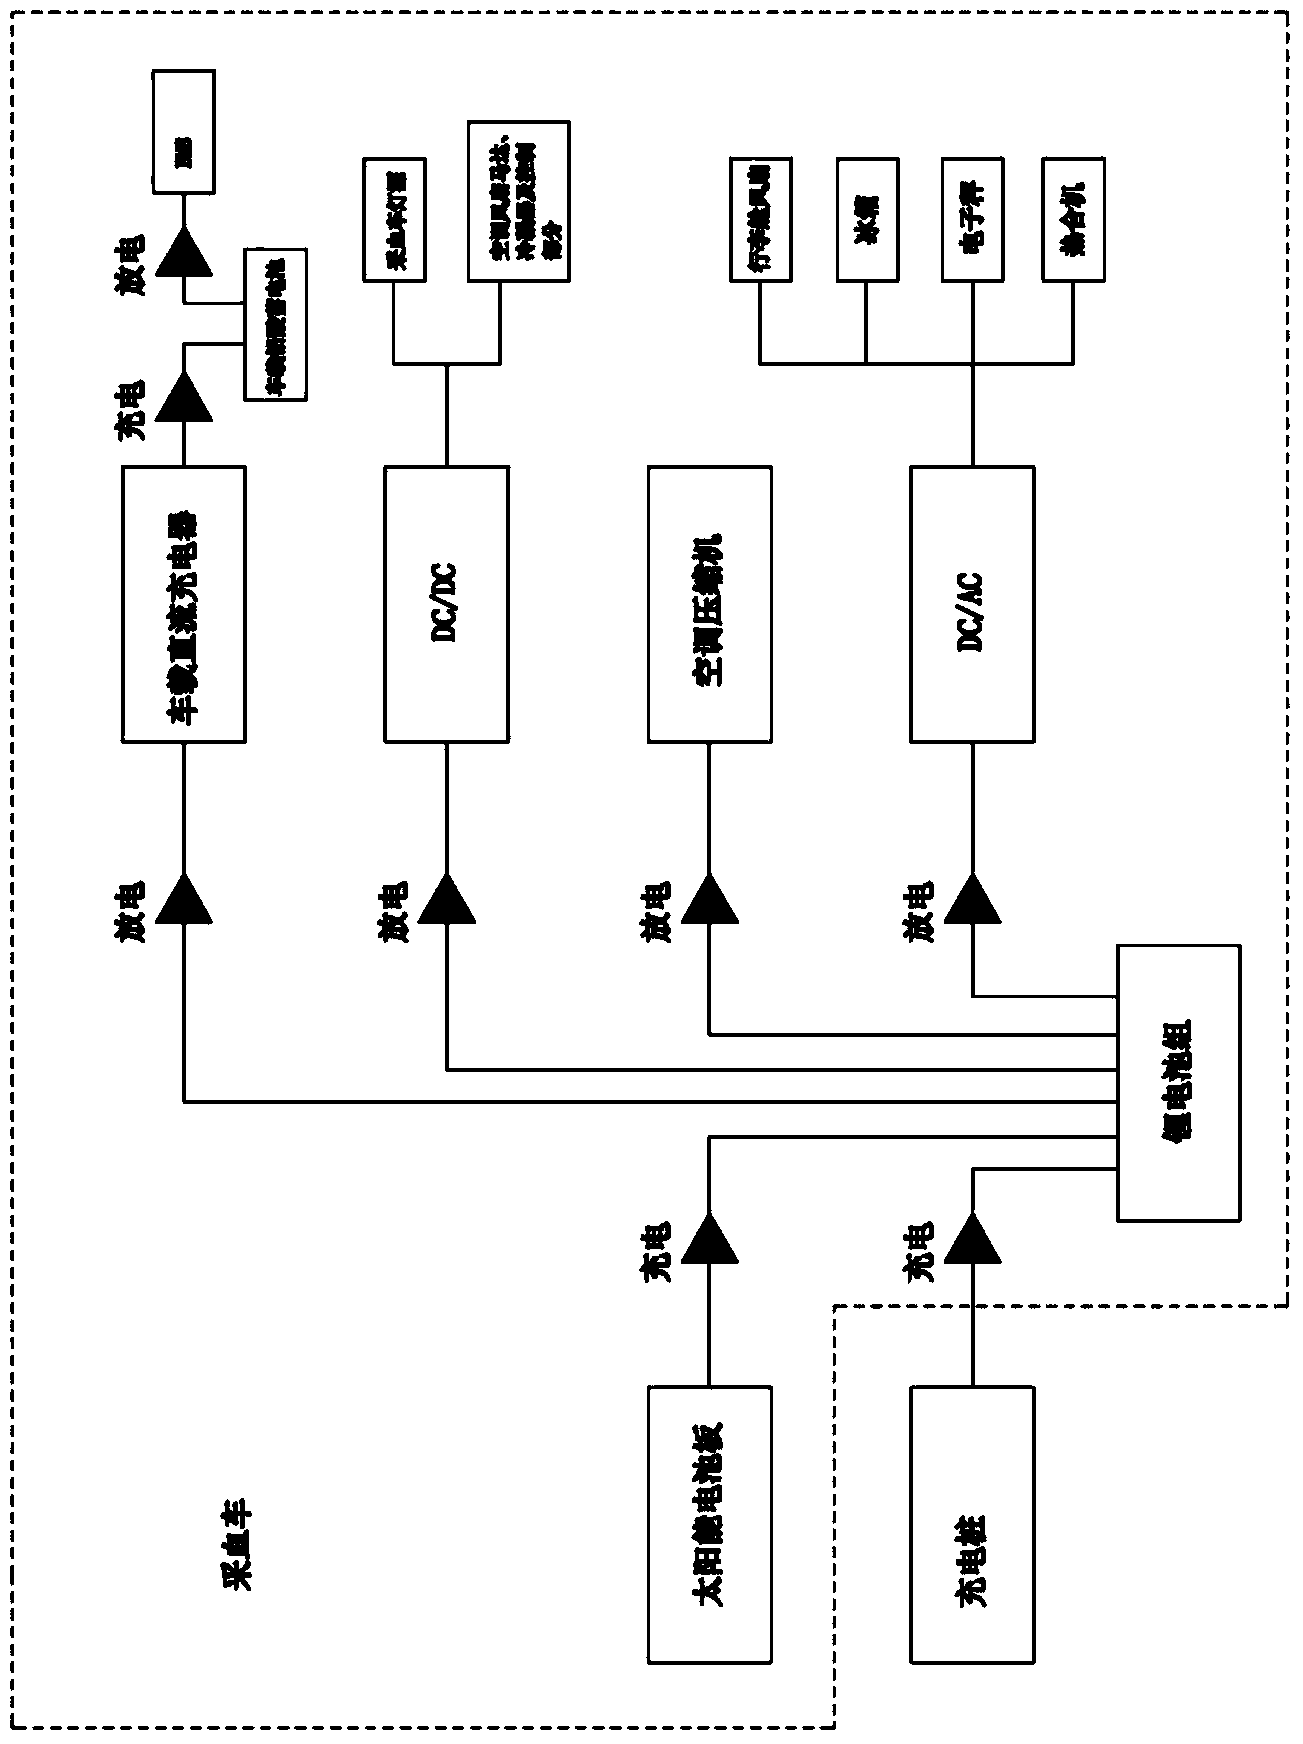 Blood collecting vehicle and power supply device and power supply mode of blood collecting vehicle-mounted equipment